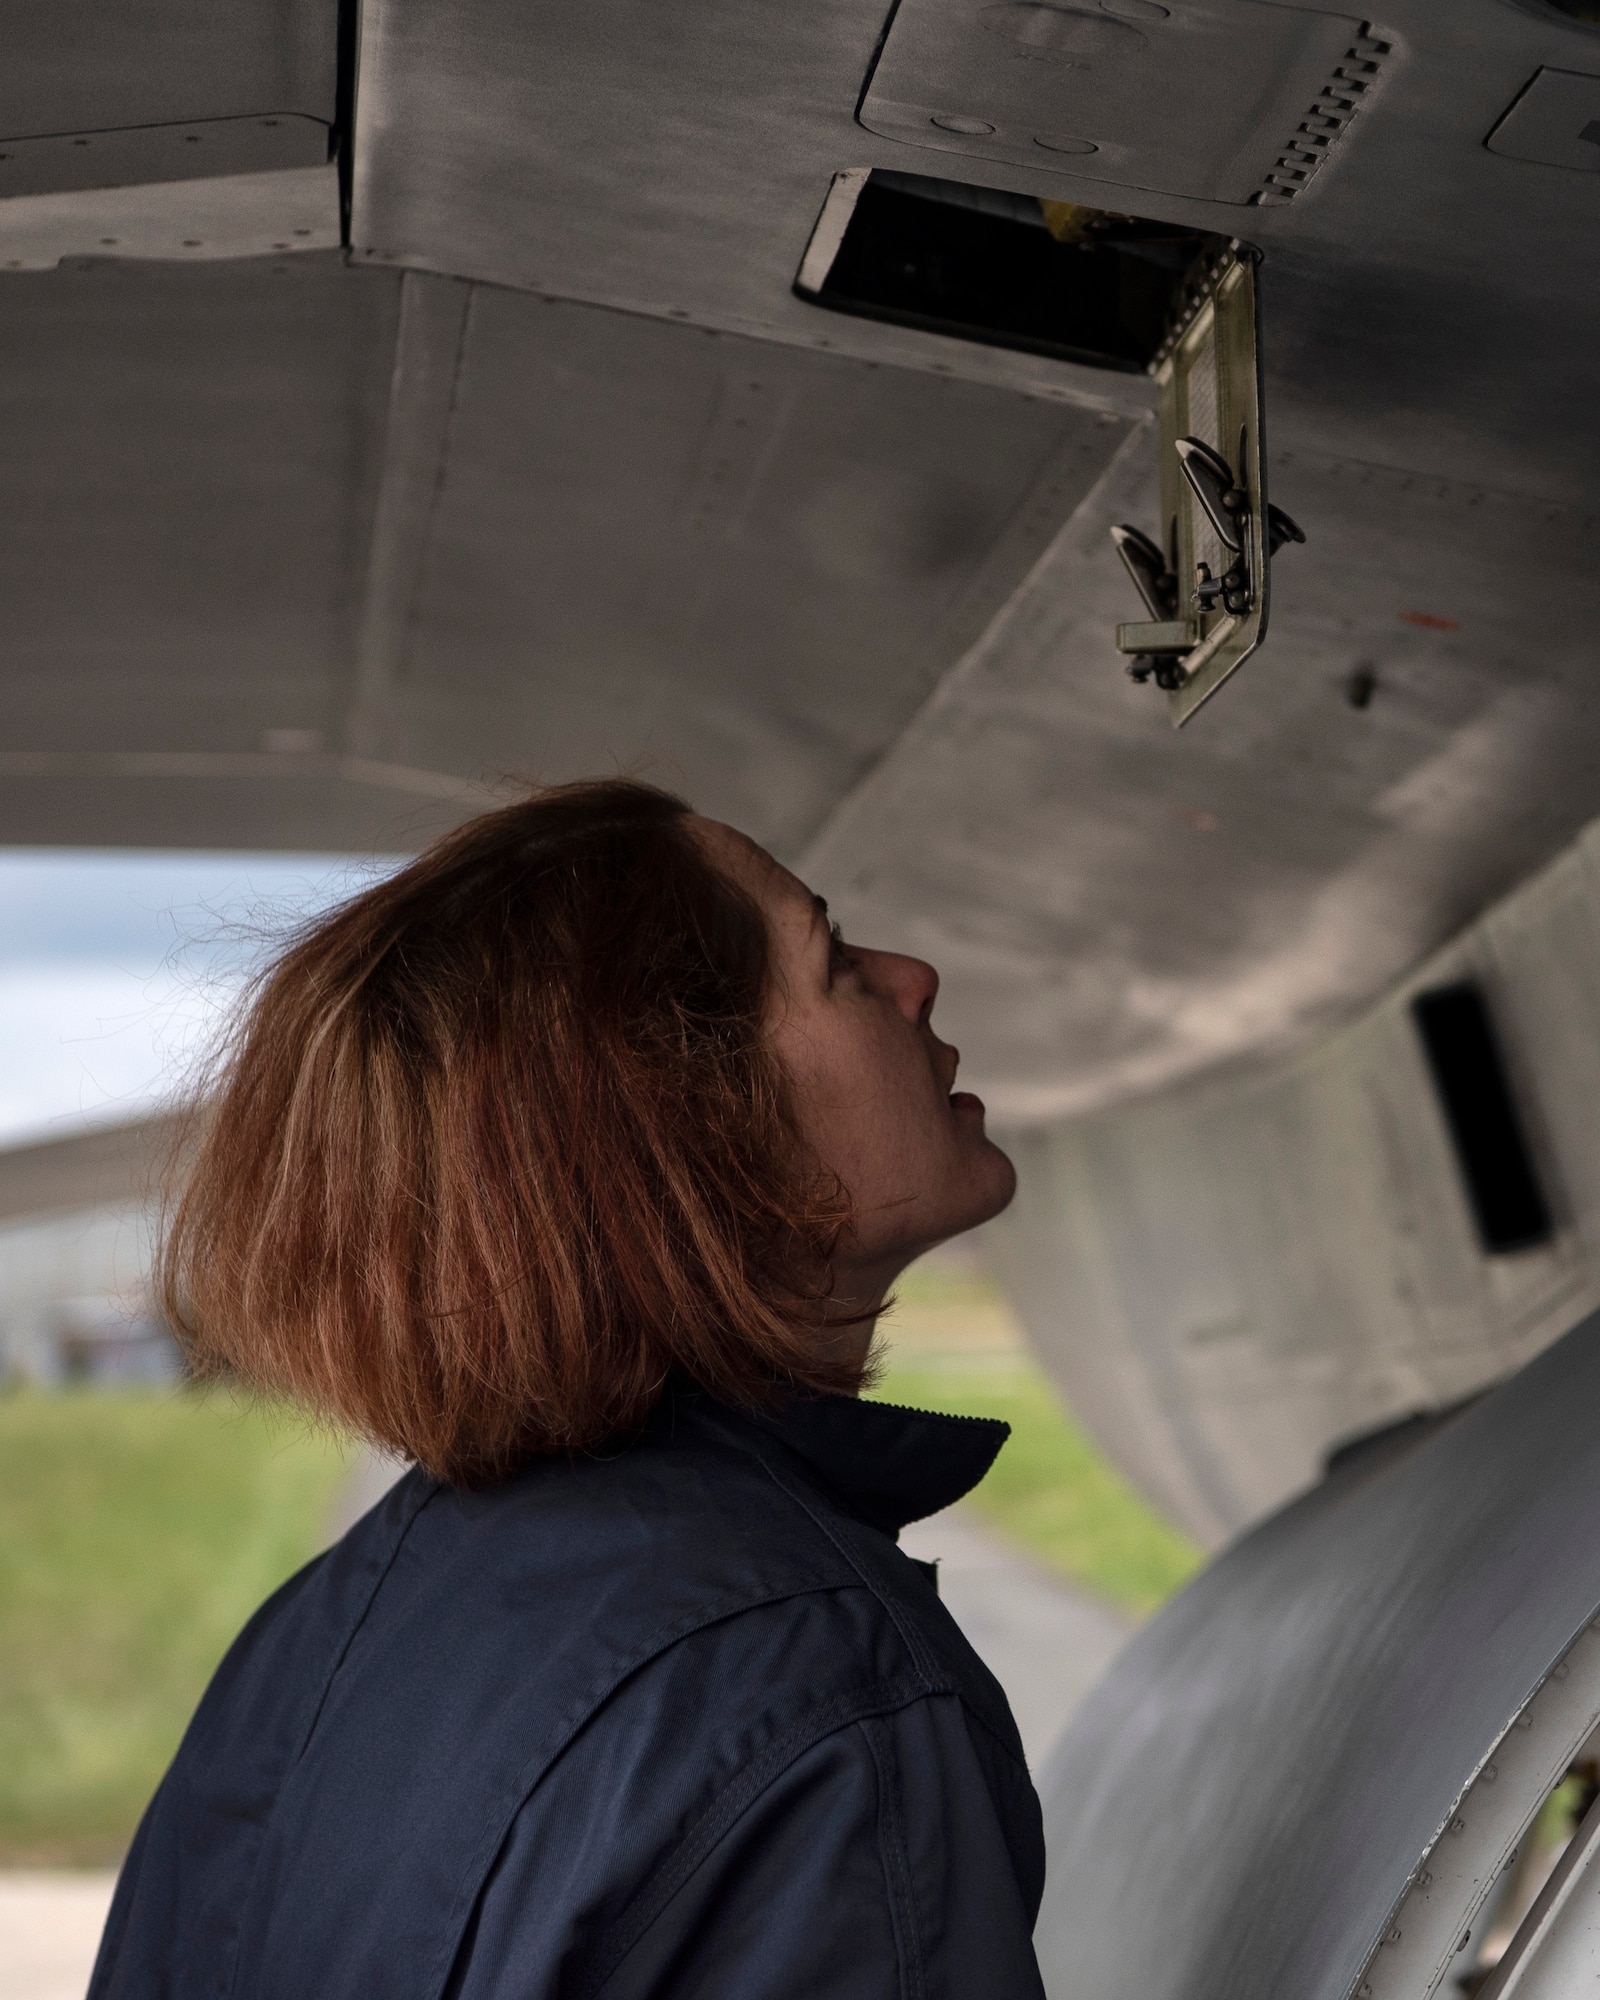 U.S. Air Force Staff Sgt. Stephanie Gillie, 52nd Security Forces Squadron investigator, inspects an F-16 Fighting Falcon at Spangdahlem Air Base, Germany, April 3, 2019. Gillie participated in the 52nd Aircraft Maintenance Squadron's new Crew Chief for a Day program which invites Airmen to experience working a day on the flightline. The weekly program launched in March 2019, and is scheduled to be a year-round event. (U.S. Air Force photo by Airman 1st Class Valerie Seelye)